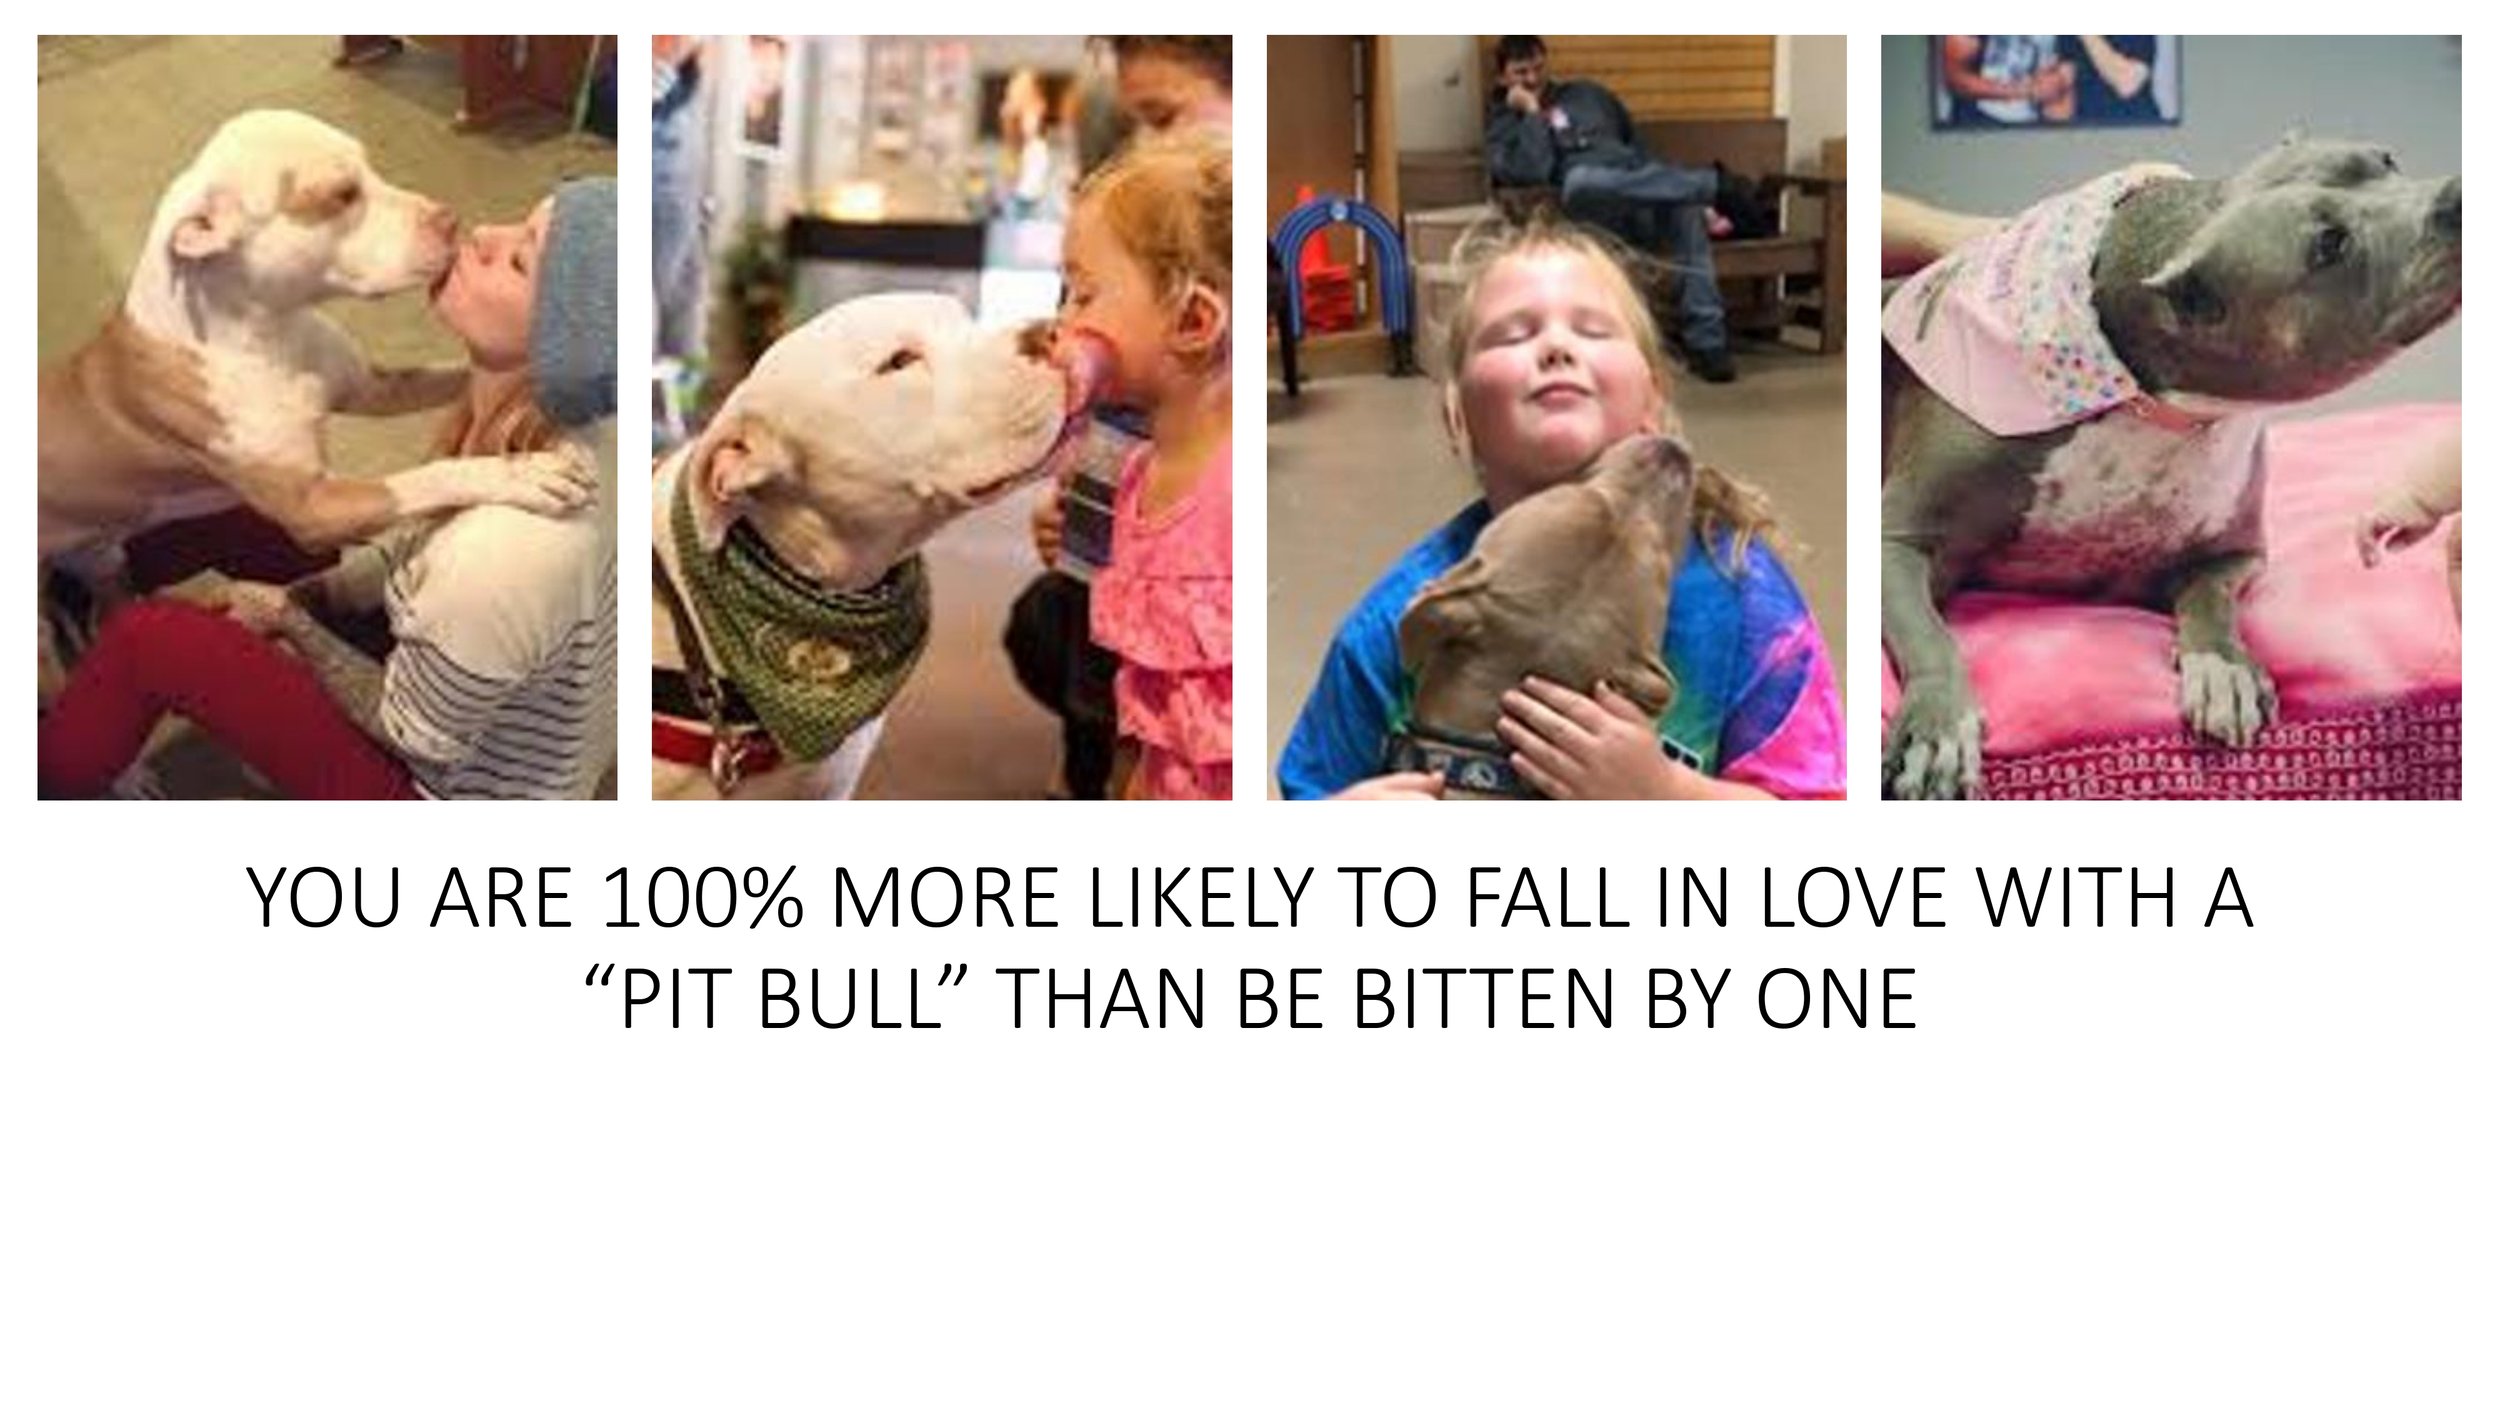 Pit+Bull+Presentation_pages-to-jpg-0030.jpg